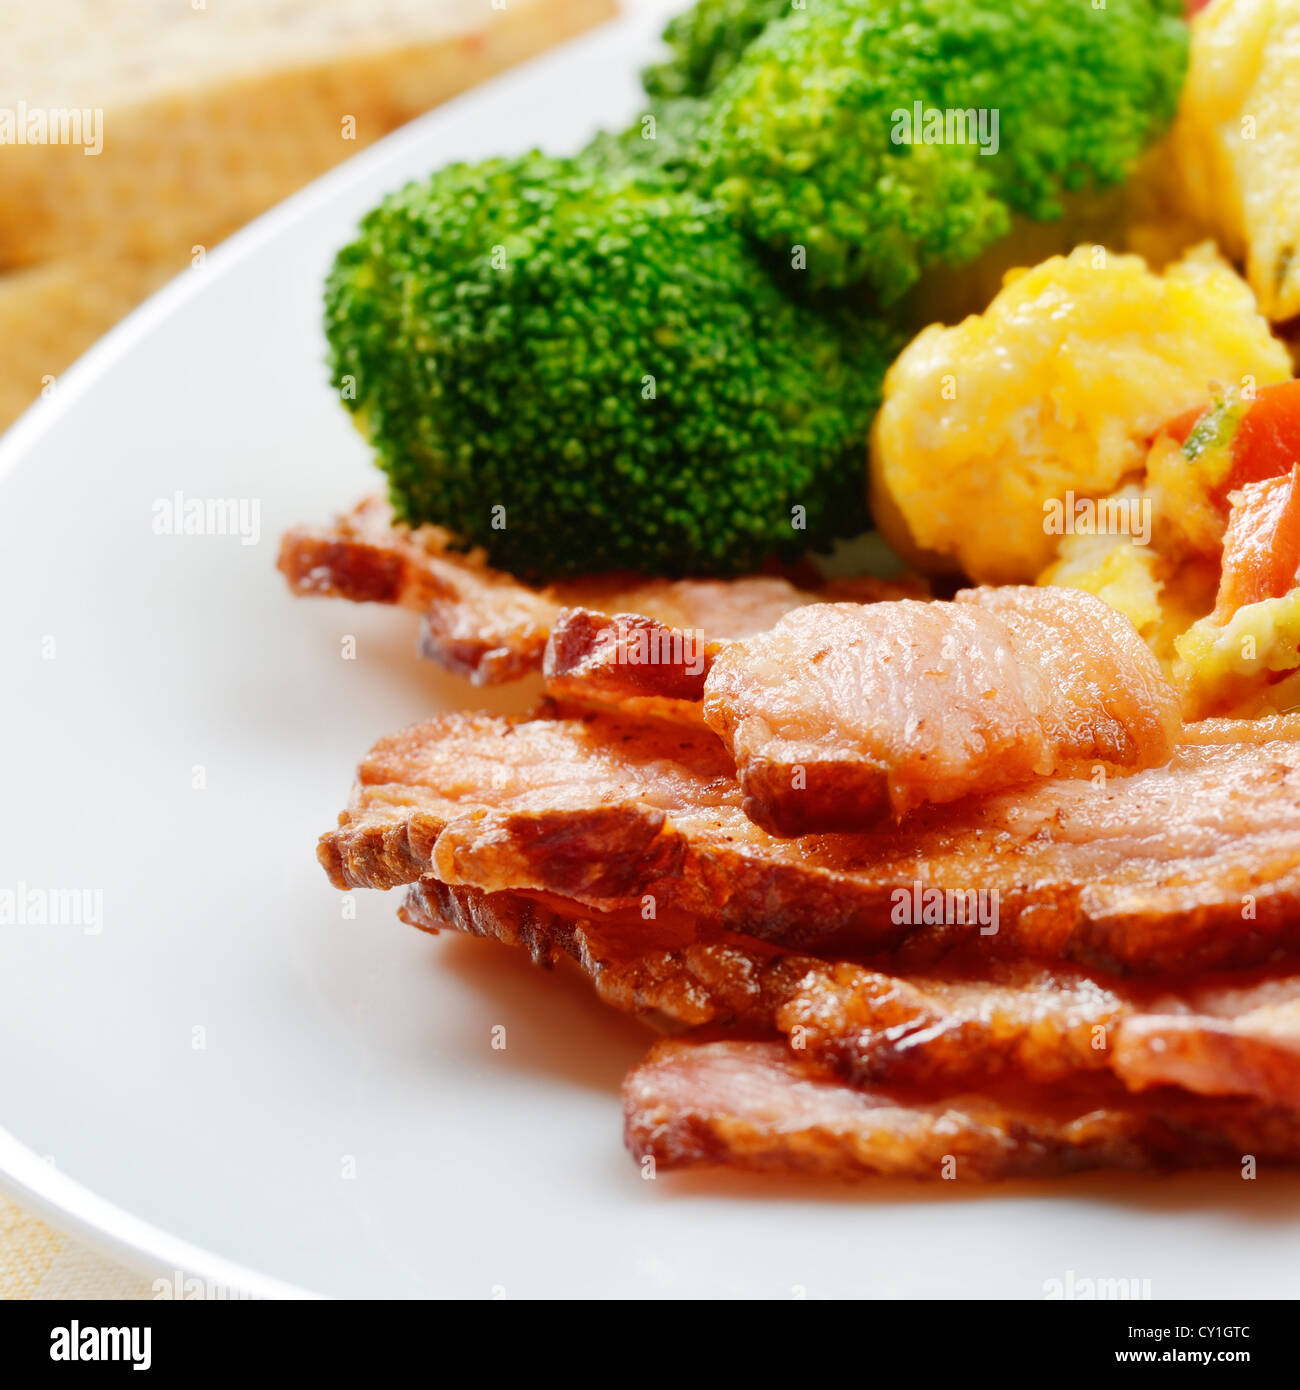 Omelet with vegetables, fried bacon and bread Stock Photo